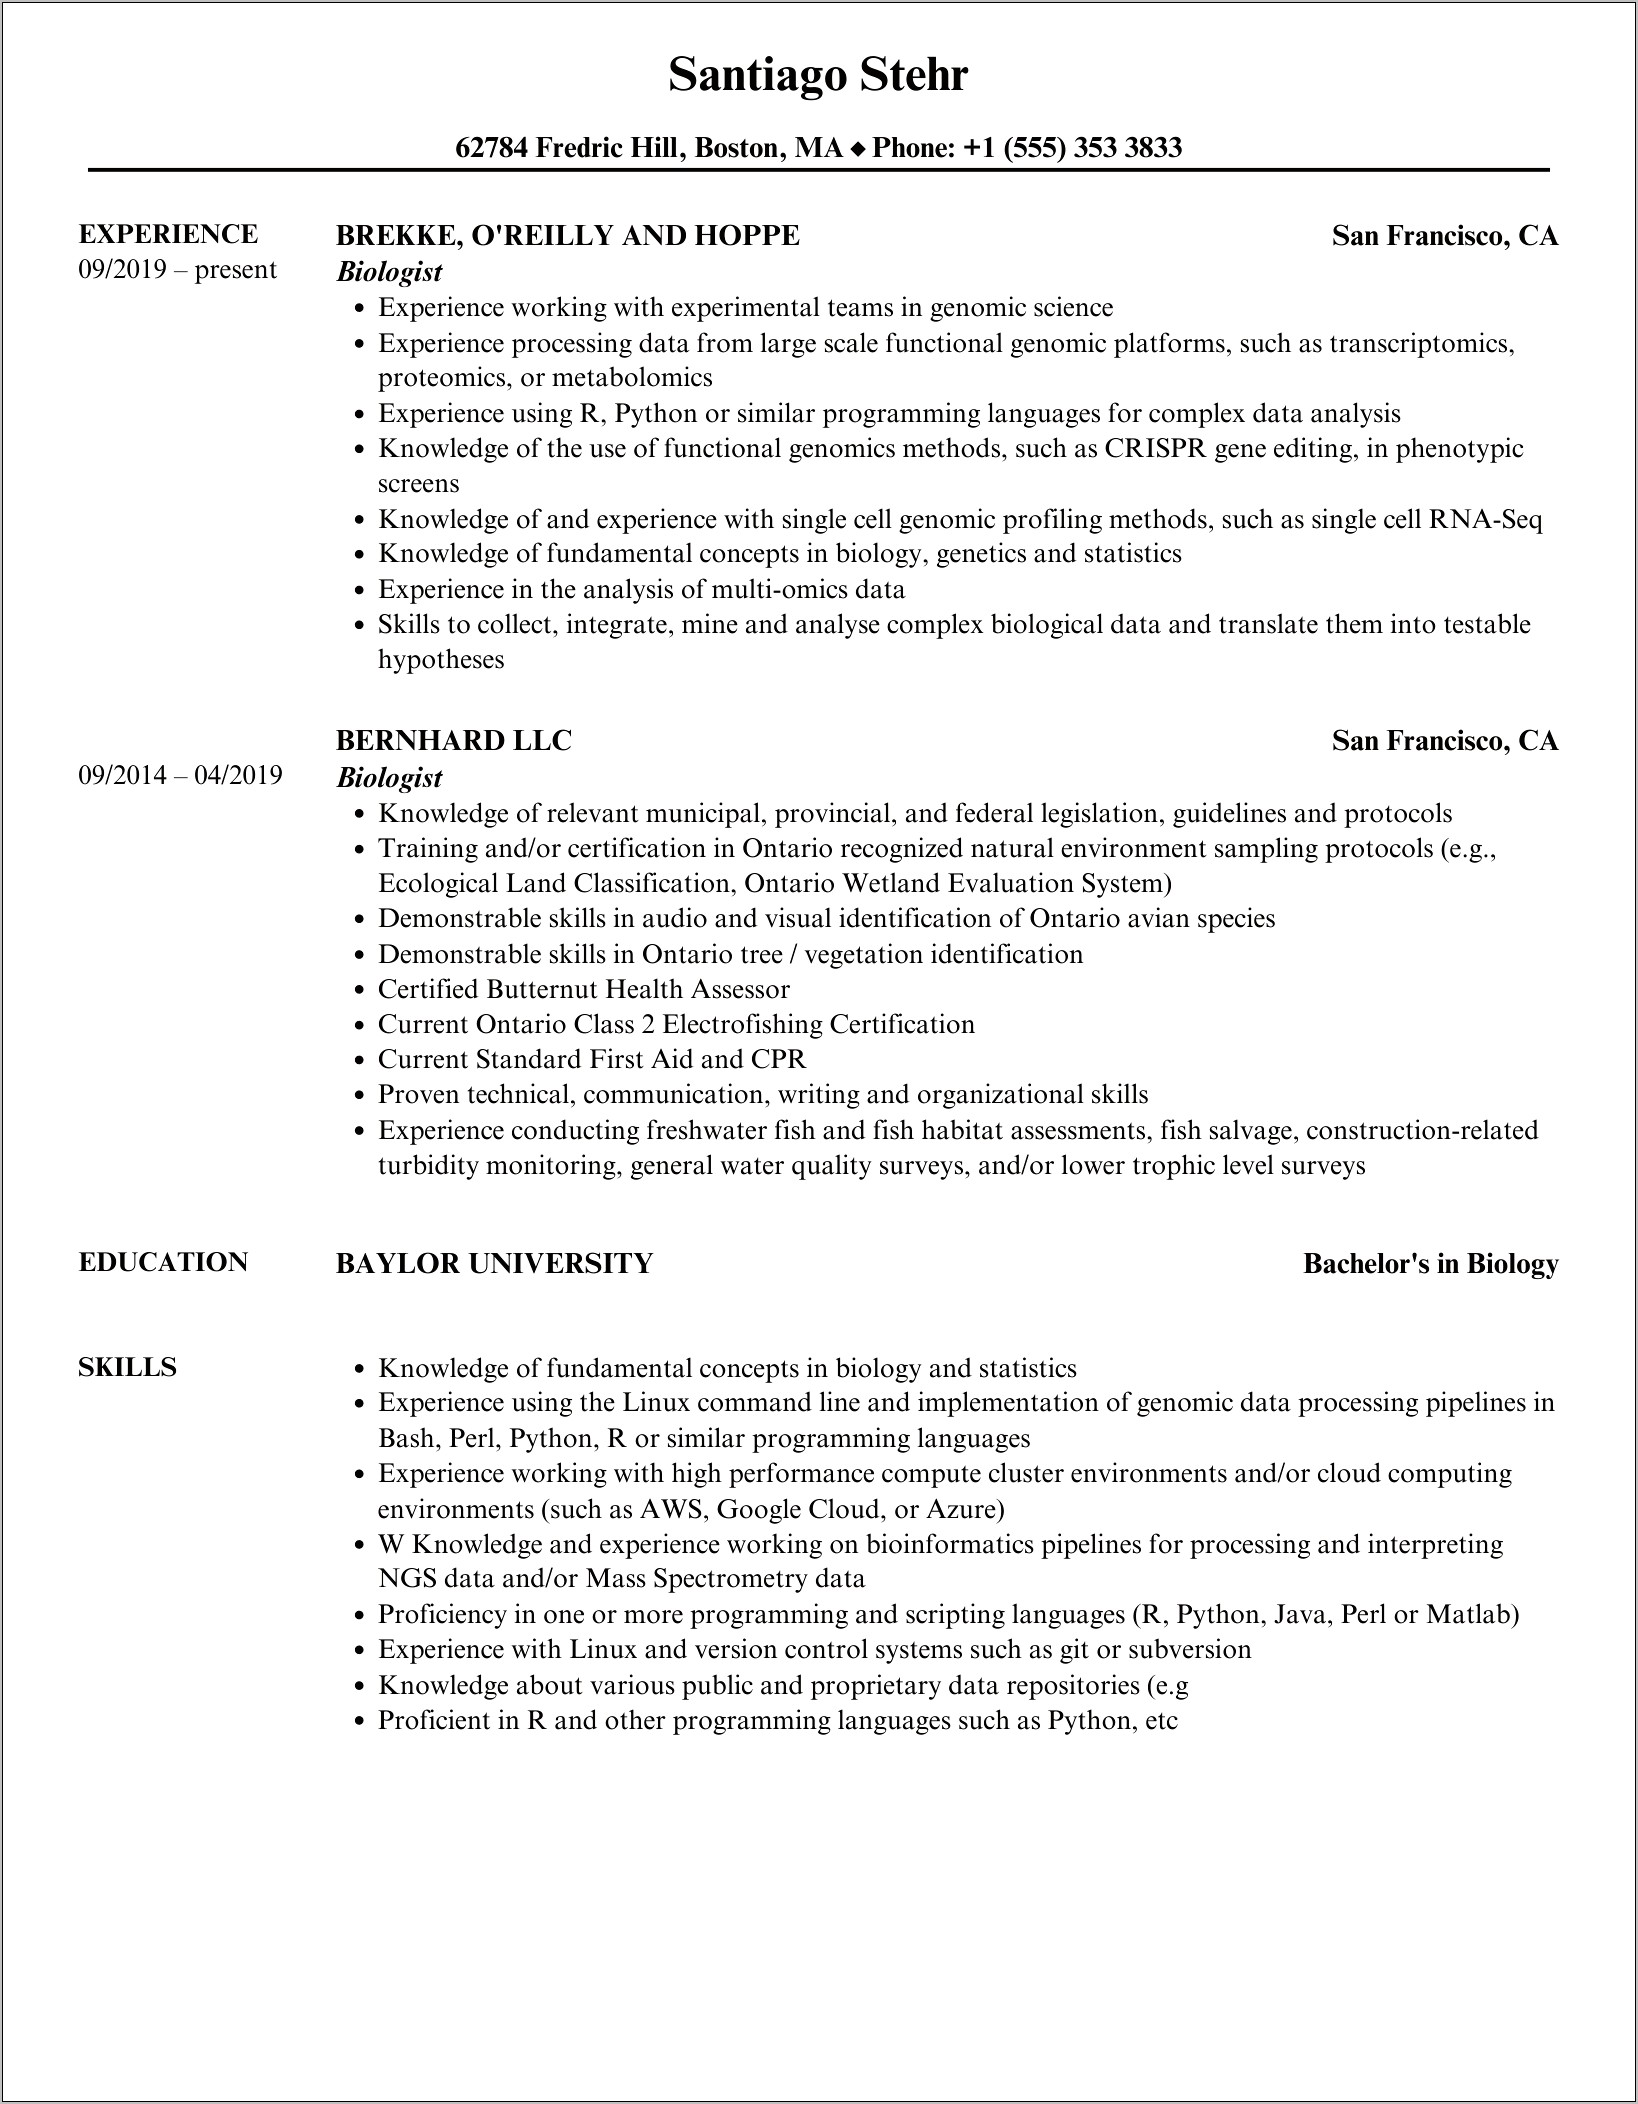 Resume Examples For Biology Majors